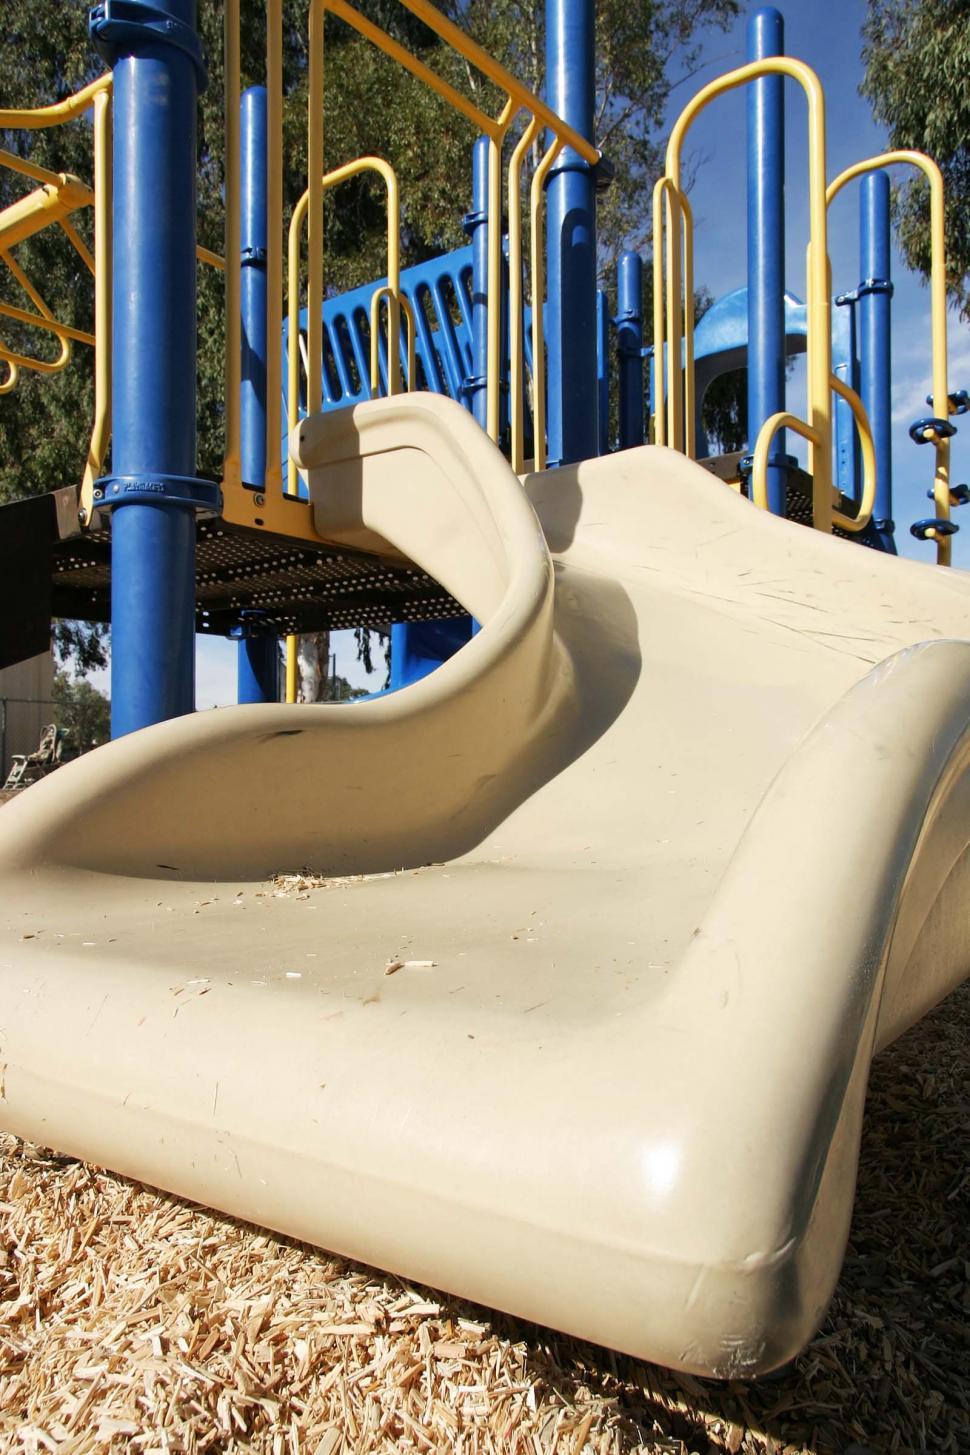 Free Image of Playground With a Central Slide 